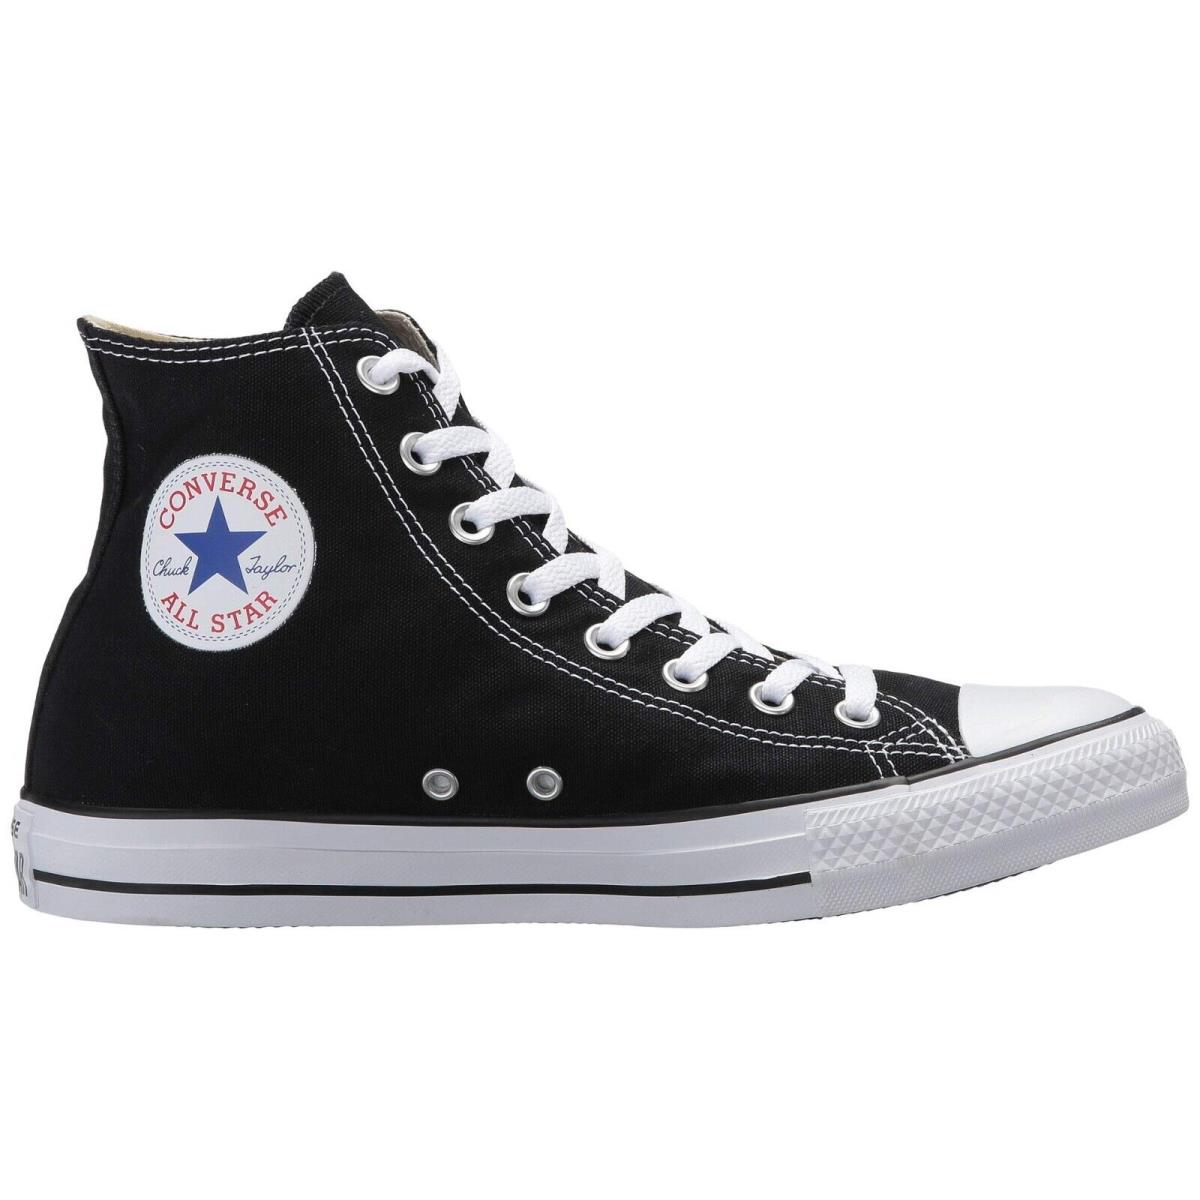 Converse Chuck Taylor All Star High Top Unisex Canvas Sneaker Classic Shoes Black White